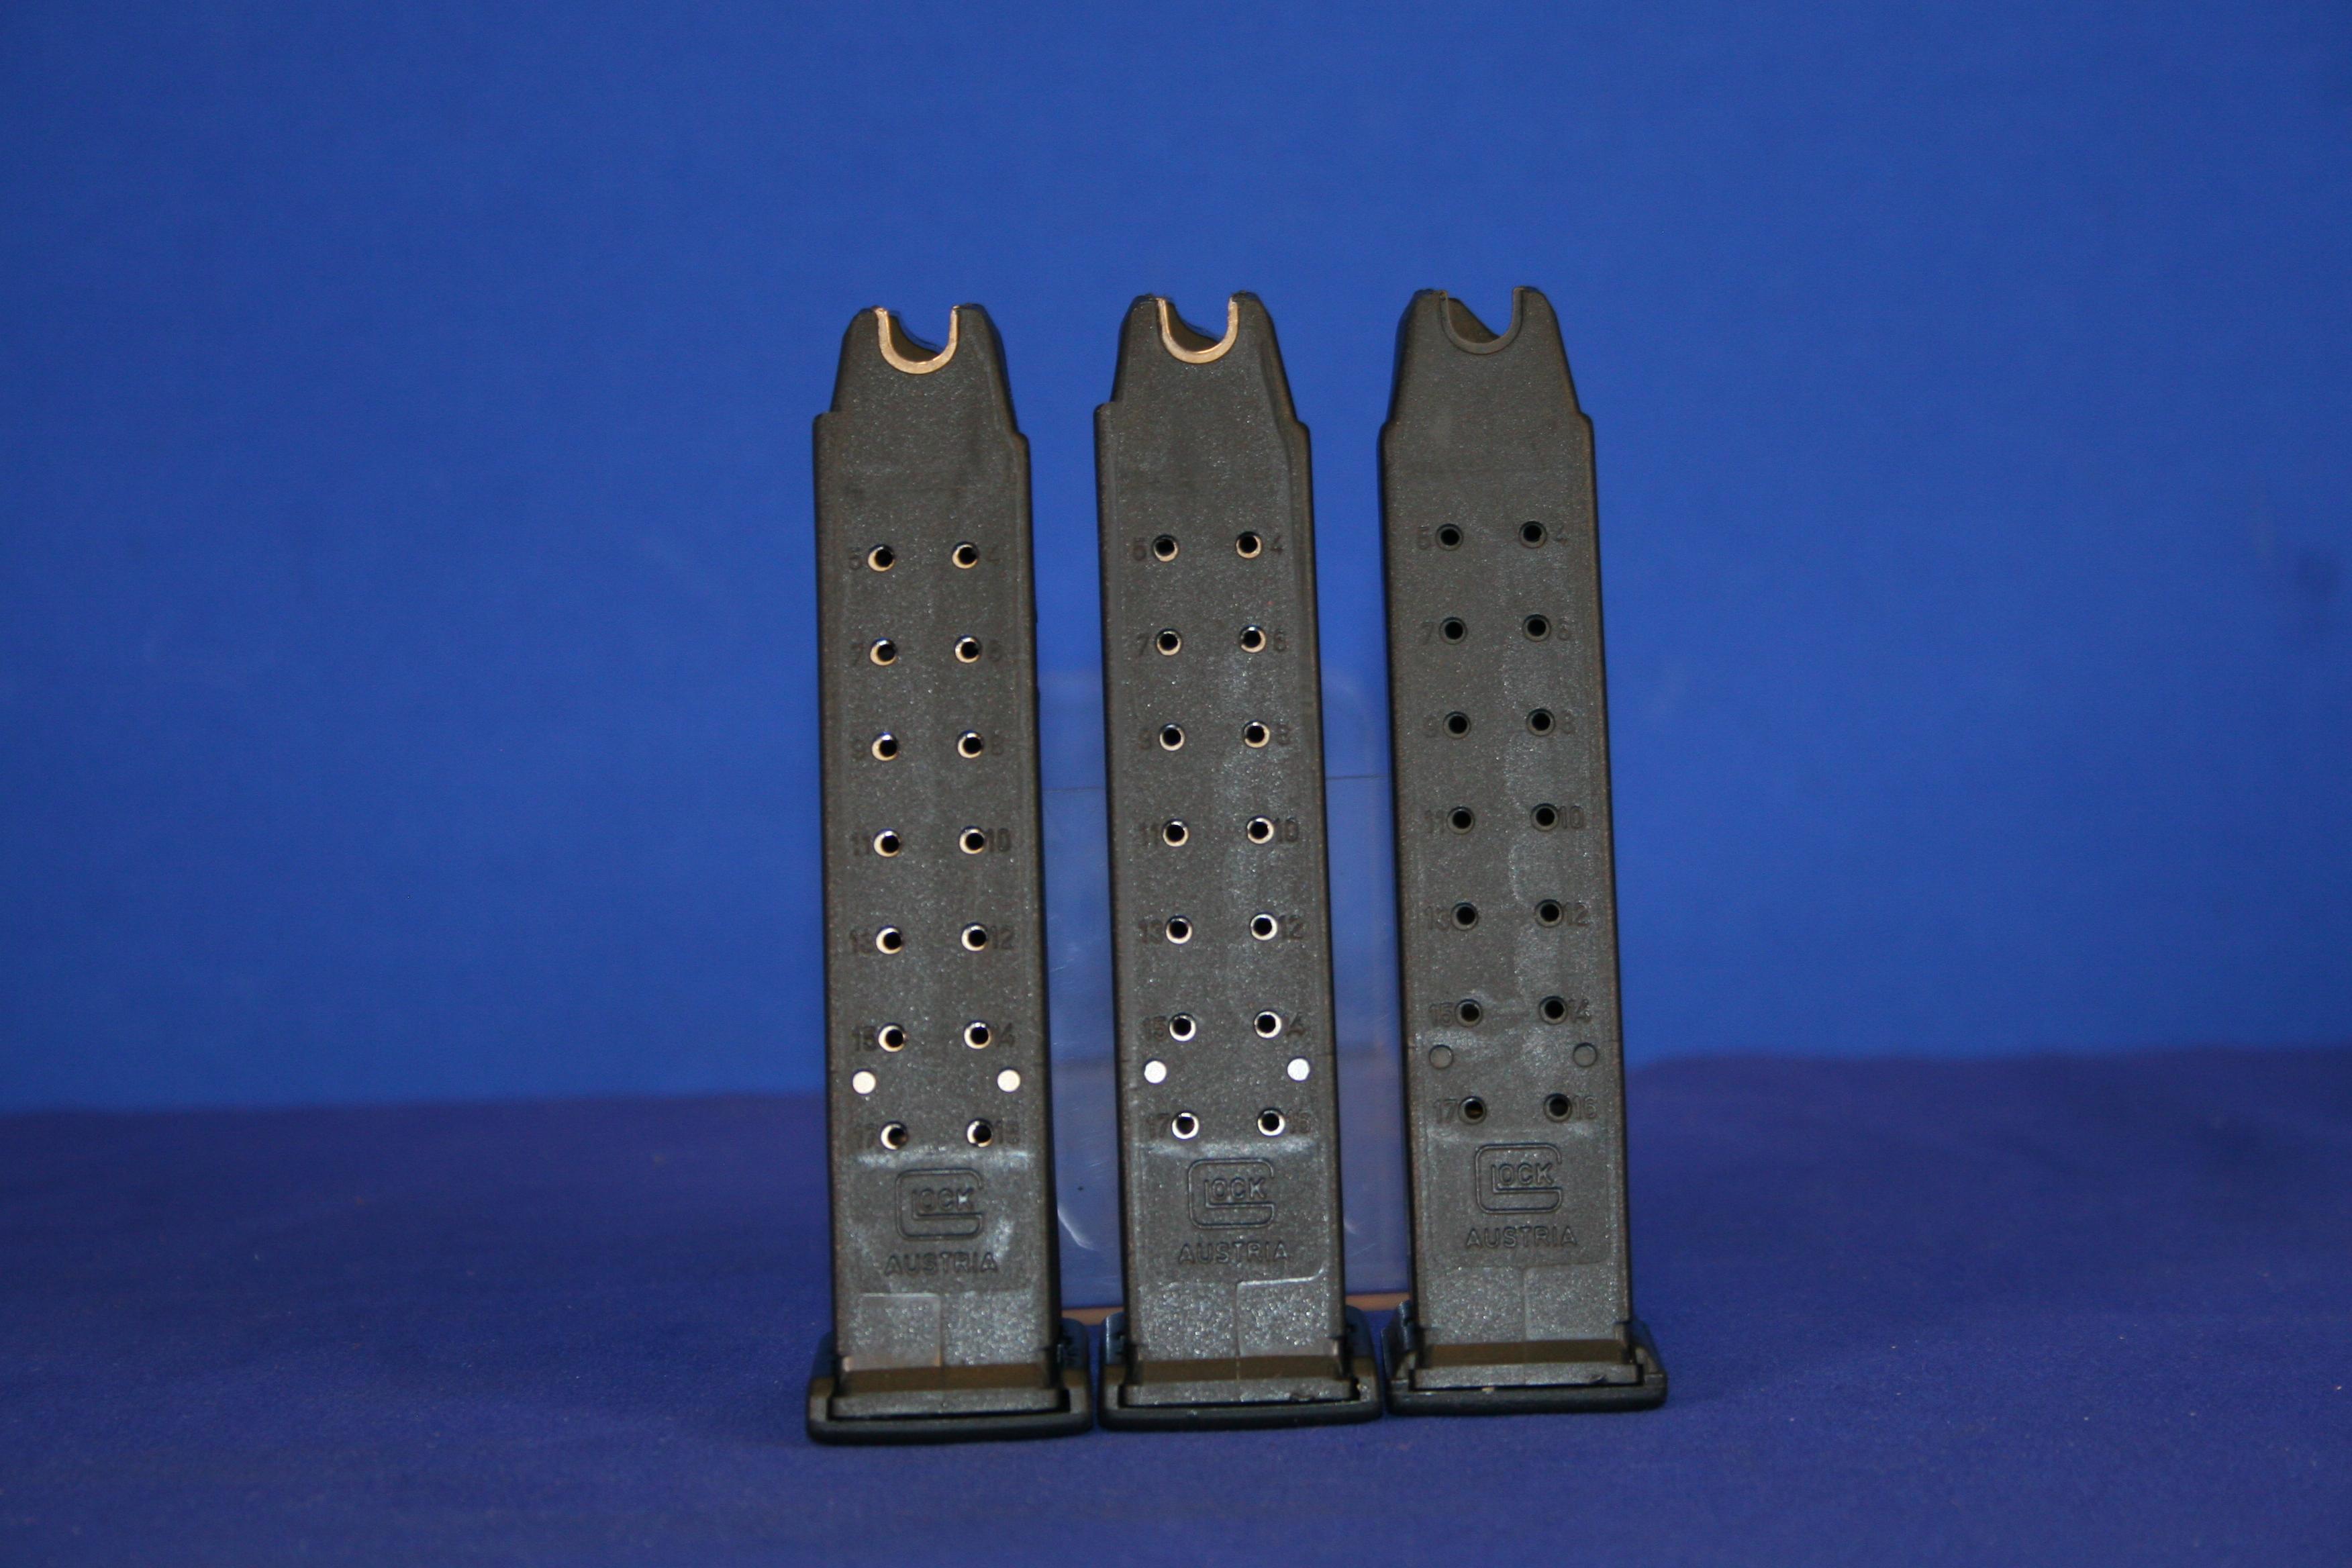 Glock 17 Magazines. Not For Sale in California.